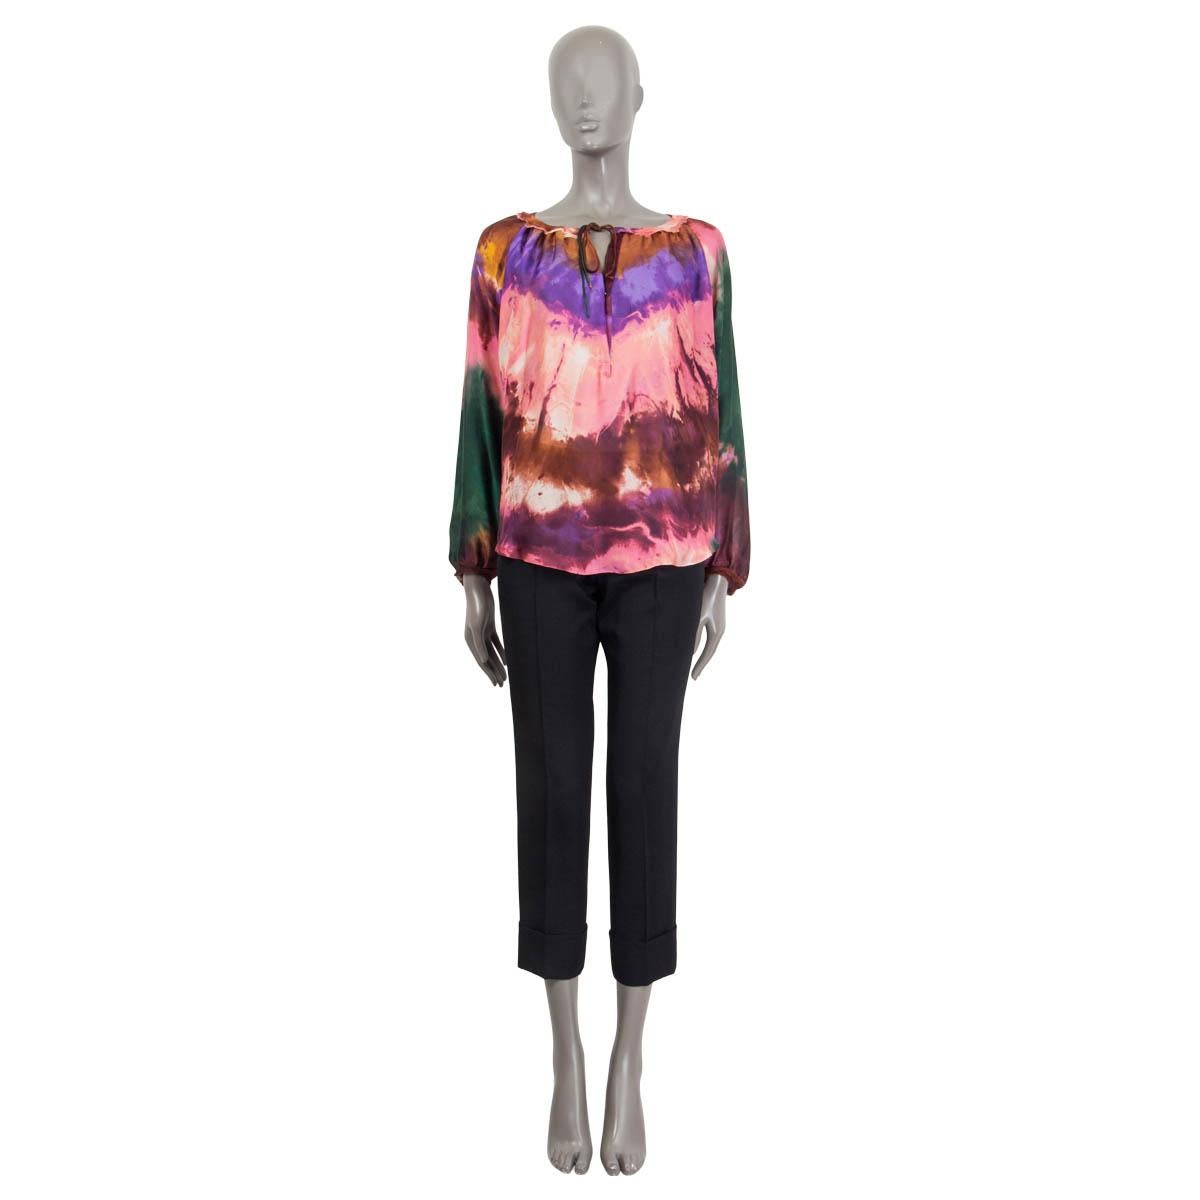 100% authentic Emilio Pucci tie-dye blouse in brown, green, pink, purple and curry silk (100%). Features long raglan (sleeve measurements taken from the neck) balloon sleeves and a rushed, fringed hem. Opens with a hook and a self-tie ribbon at the